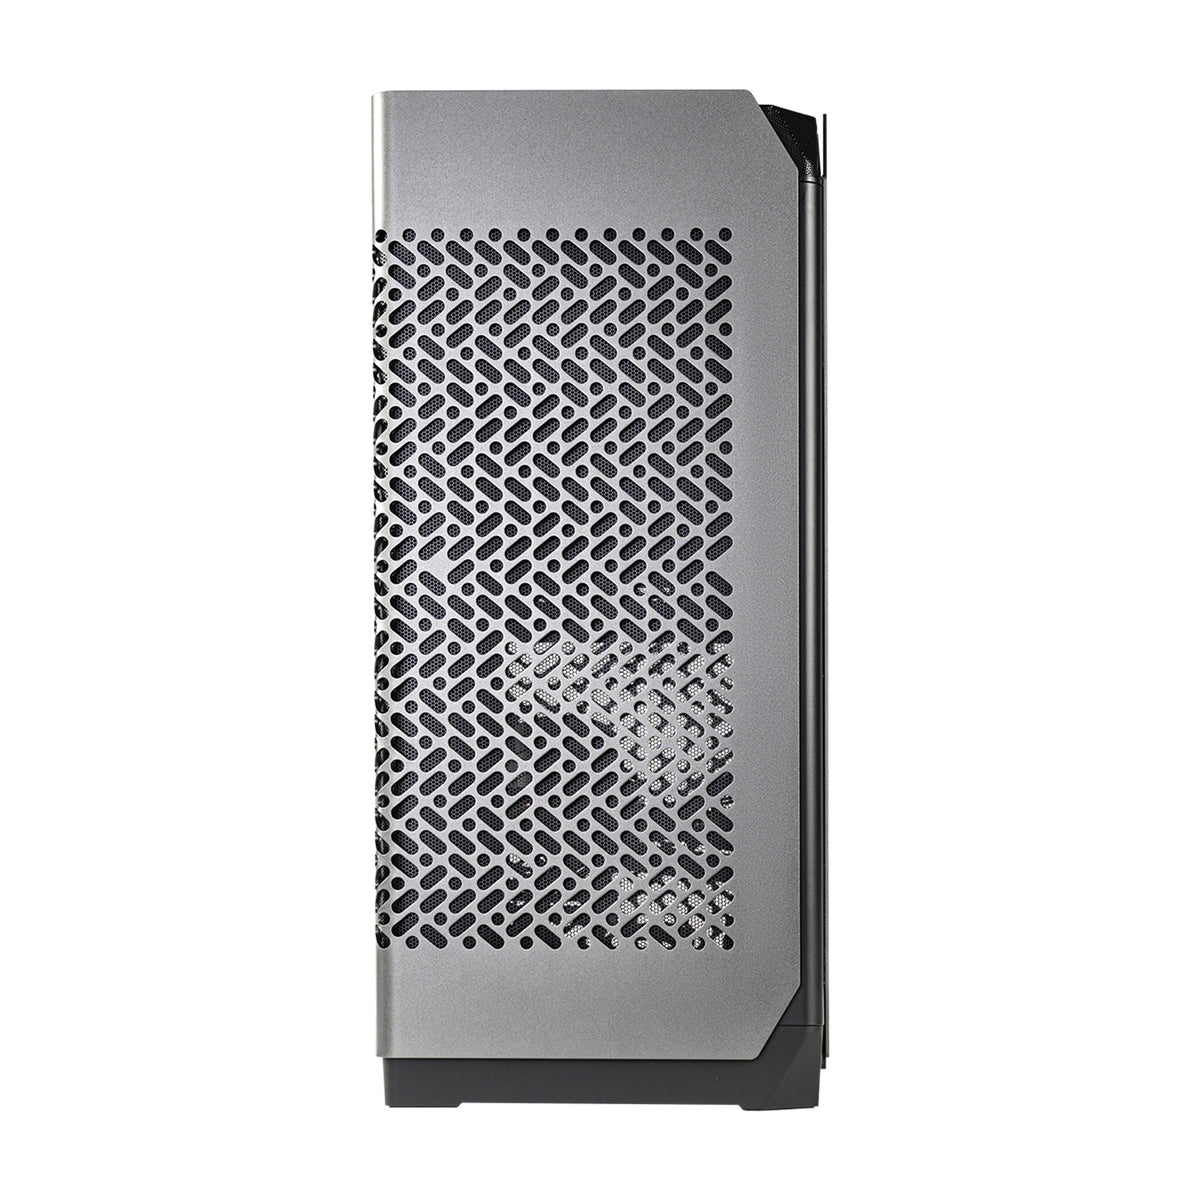 Cooler Master NCORE 100 MAX - ITX SFF Tower Case in Grey w/ 850W SFX Gold PSU